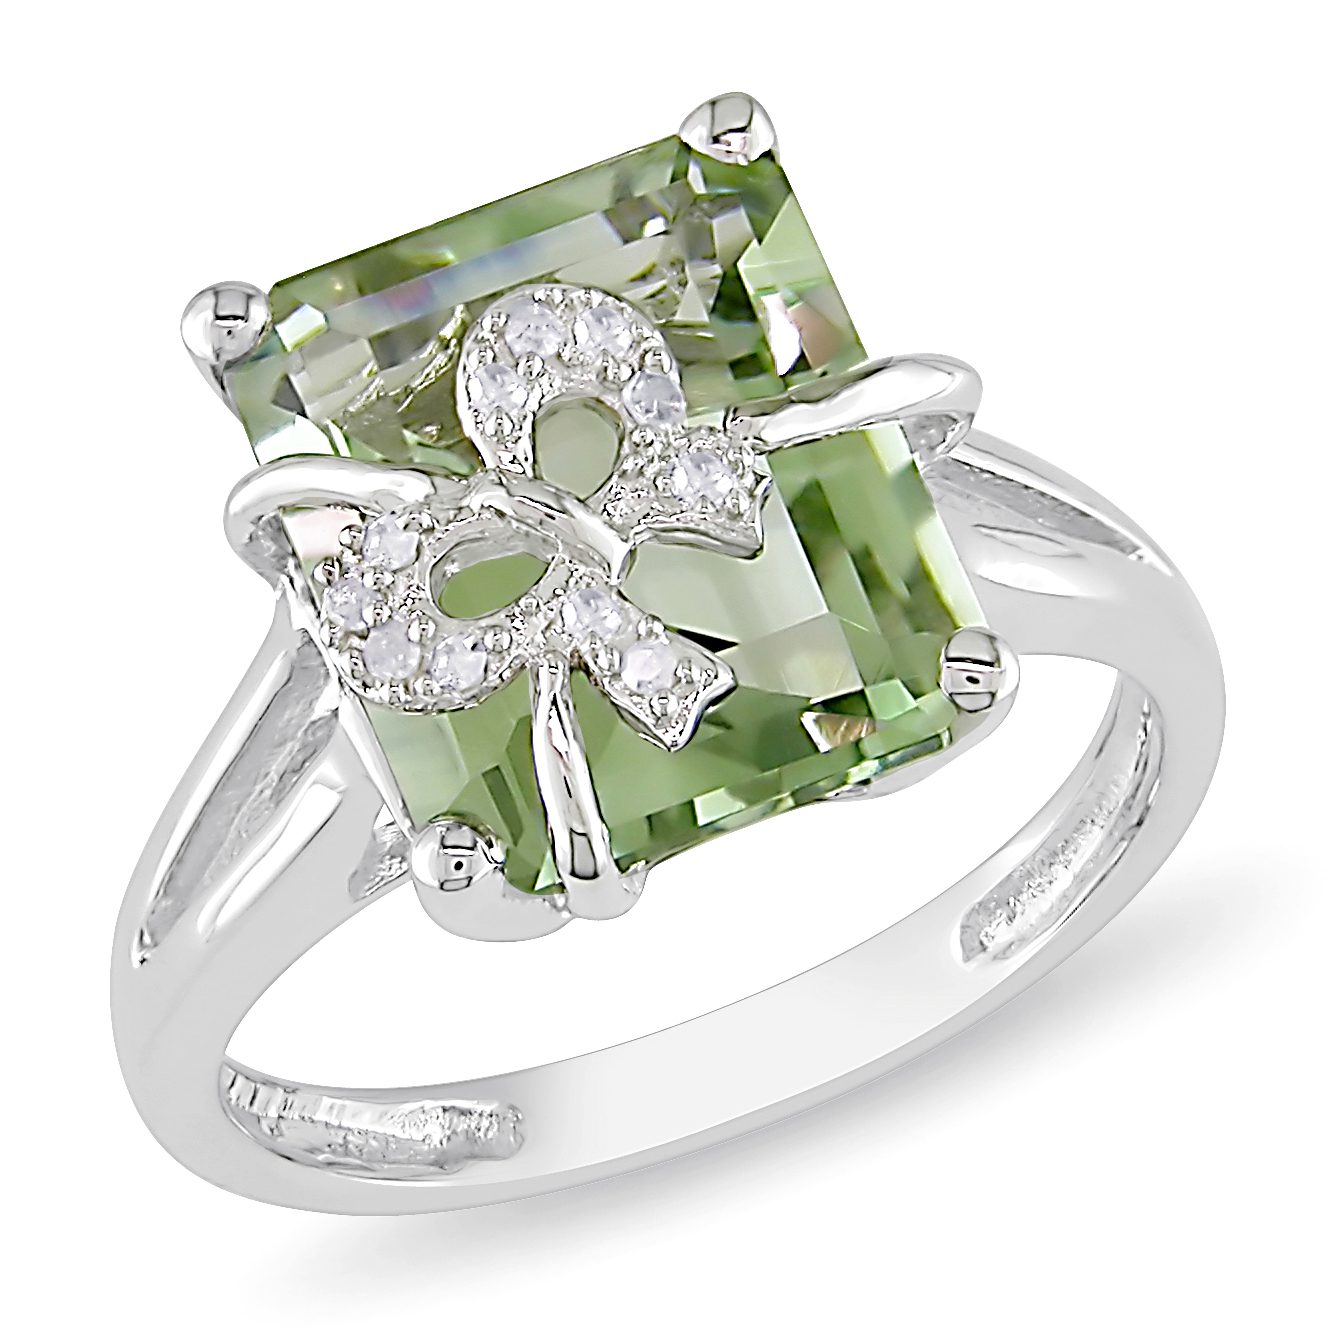 0.04 Carat T.W. Diamond and 5 1/3 Carat T.G.W. Green Amethyst Fashion Ring in Sterling Silver I3